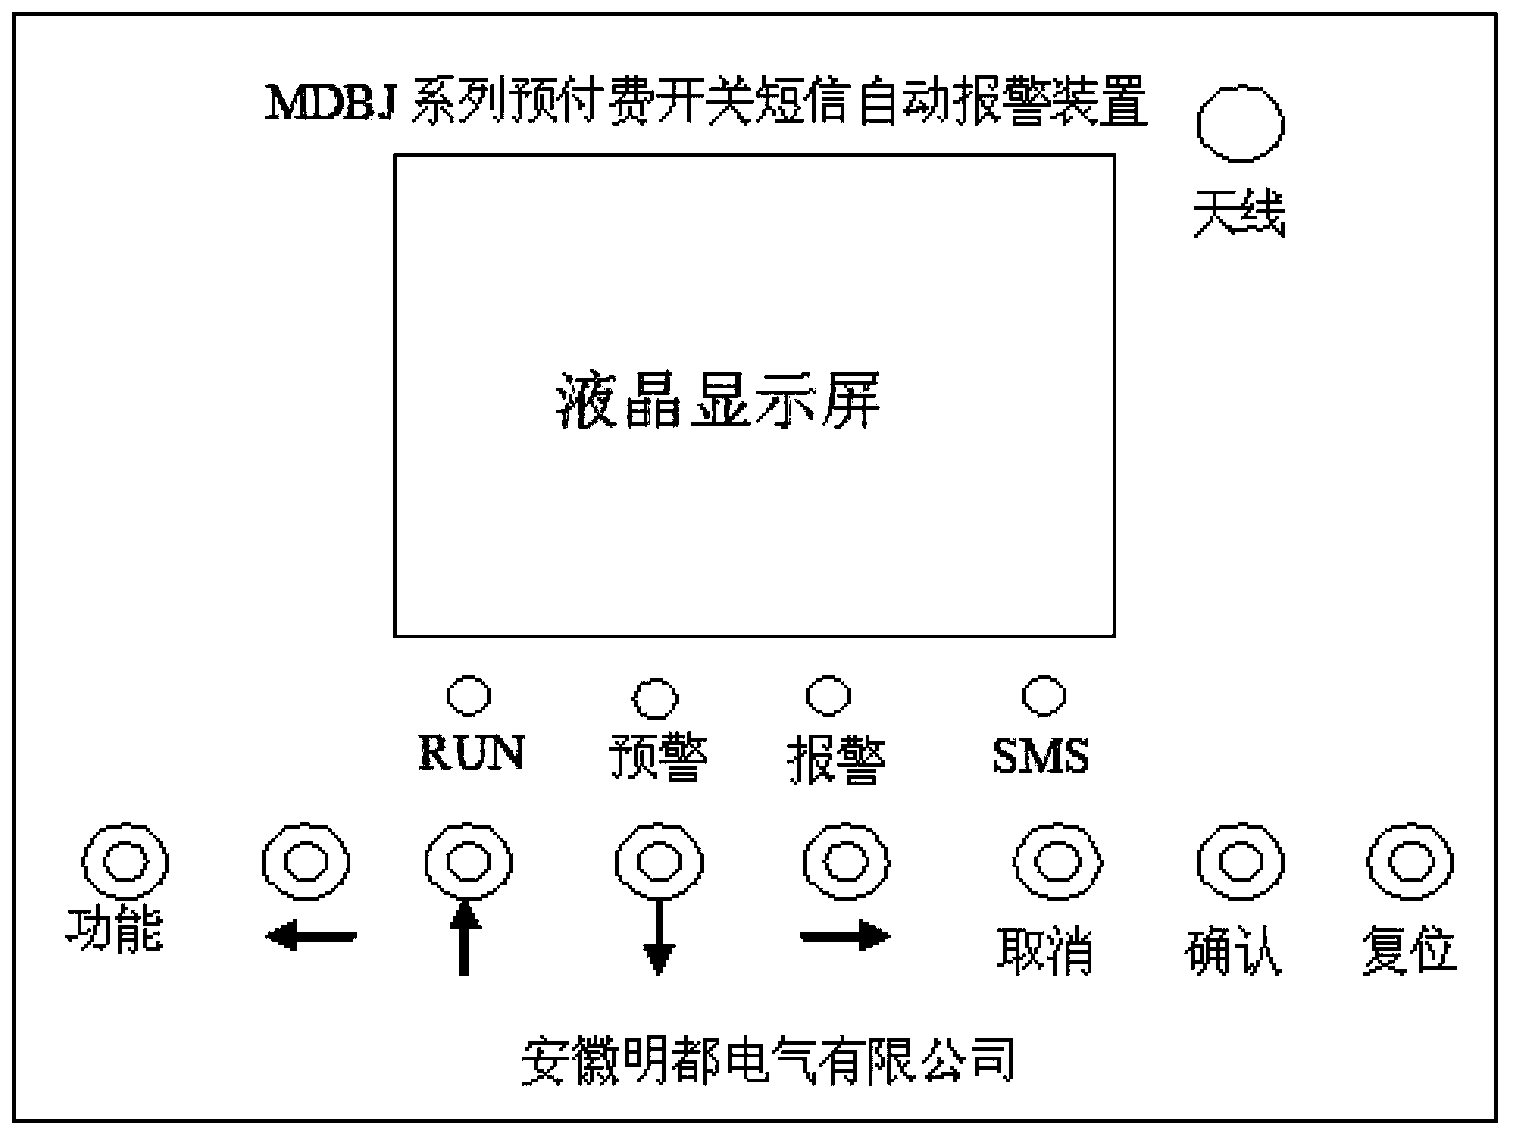 Prepayment metering control device with automatic short message warning function